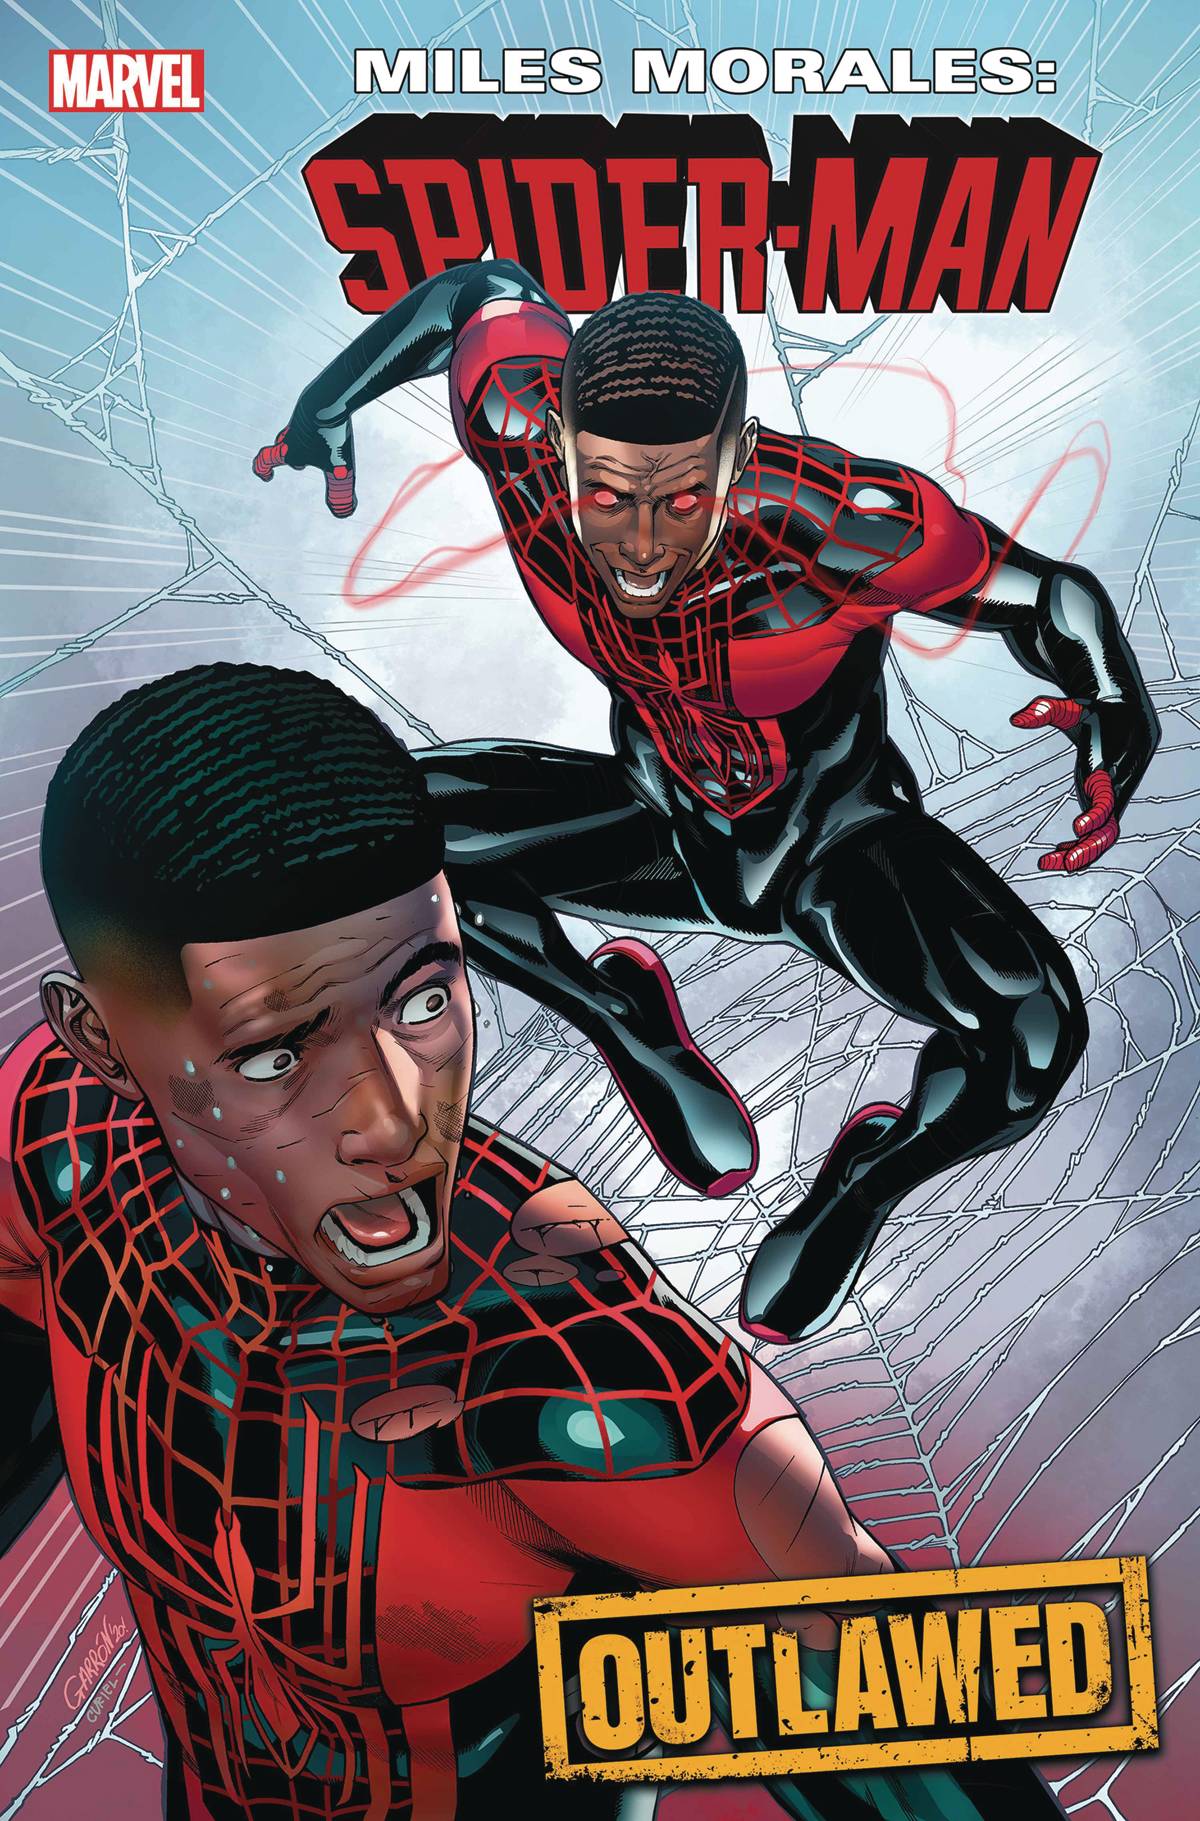 MILES MORALES SPIDER-MAN #19 OUT | Game Master's Emporium (The New GME)